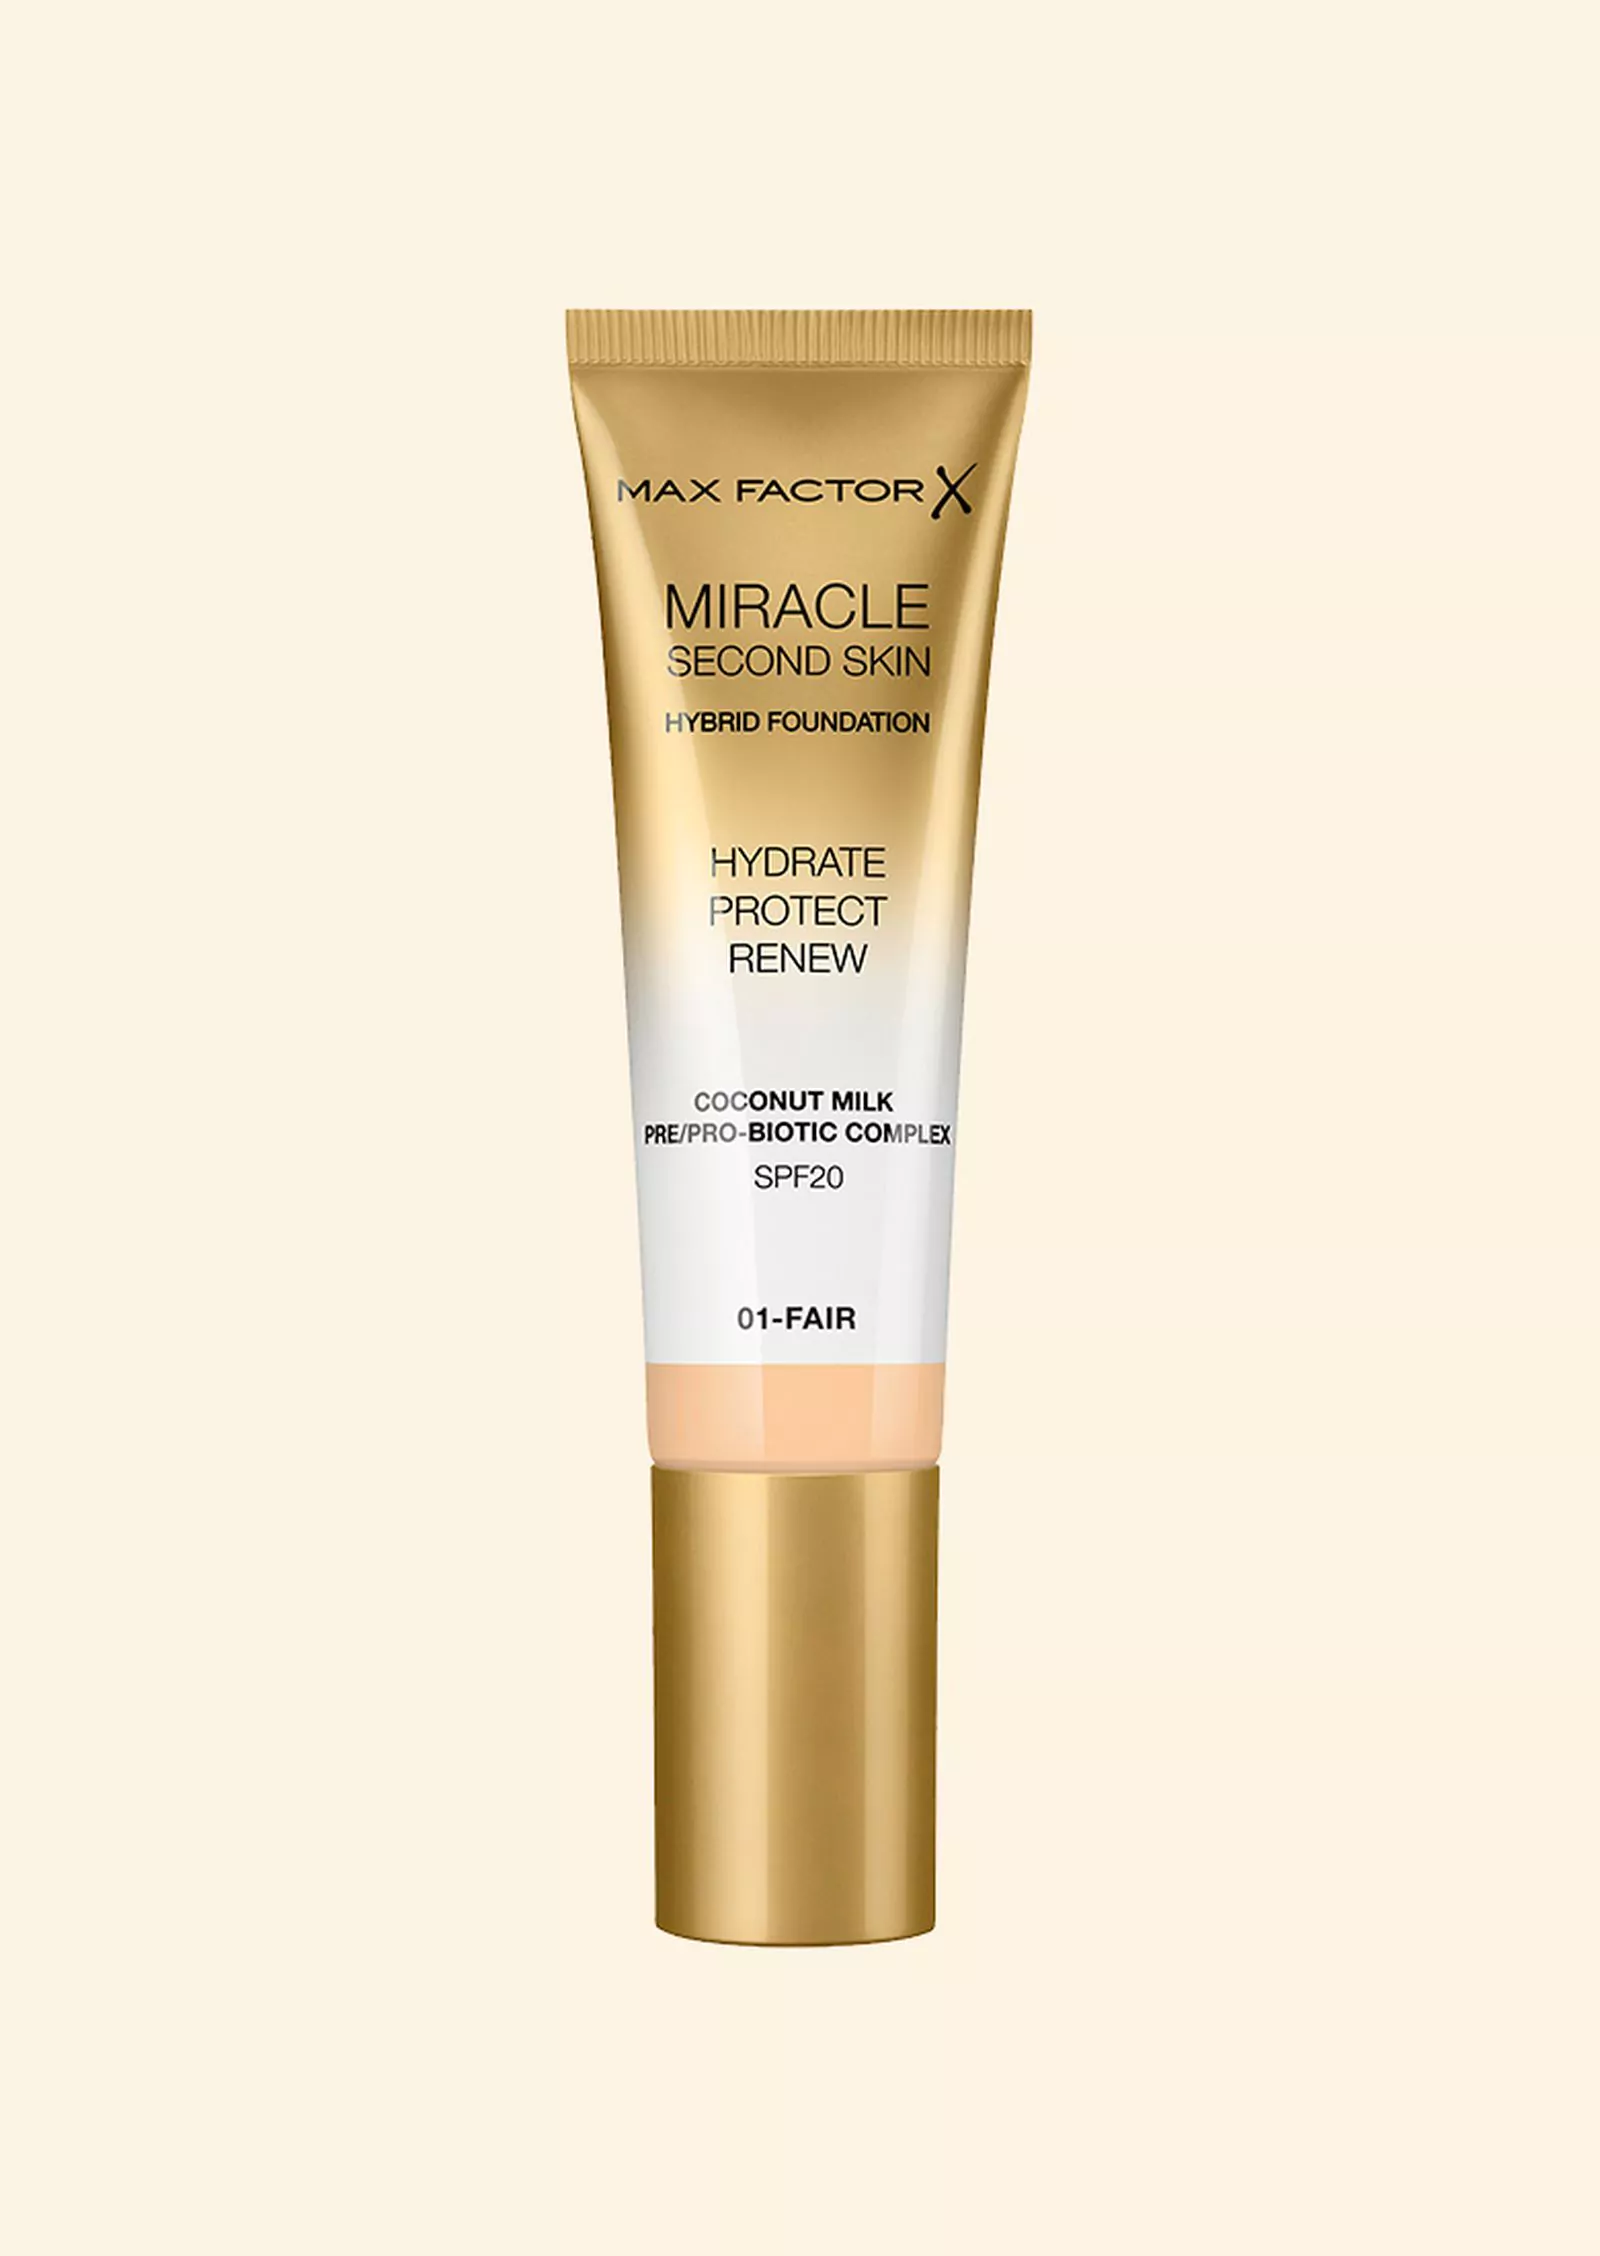 Max Factor Miracle Second Skin Hybrid Foundation Hydrate Protect Renew SPF 20